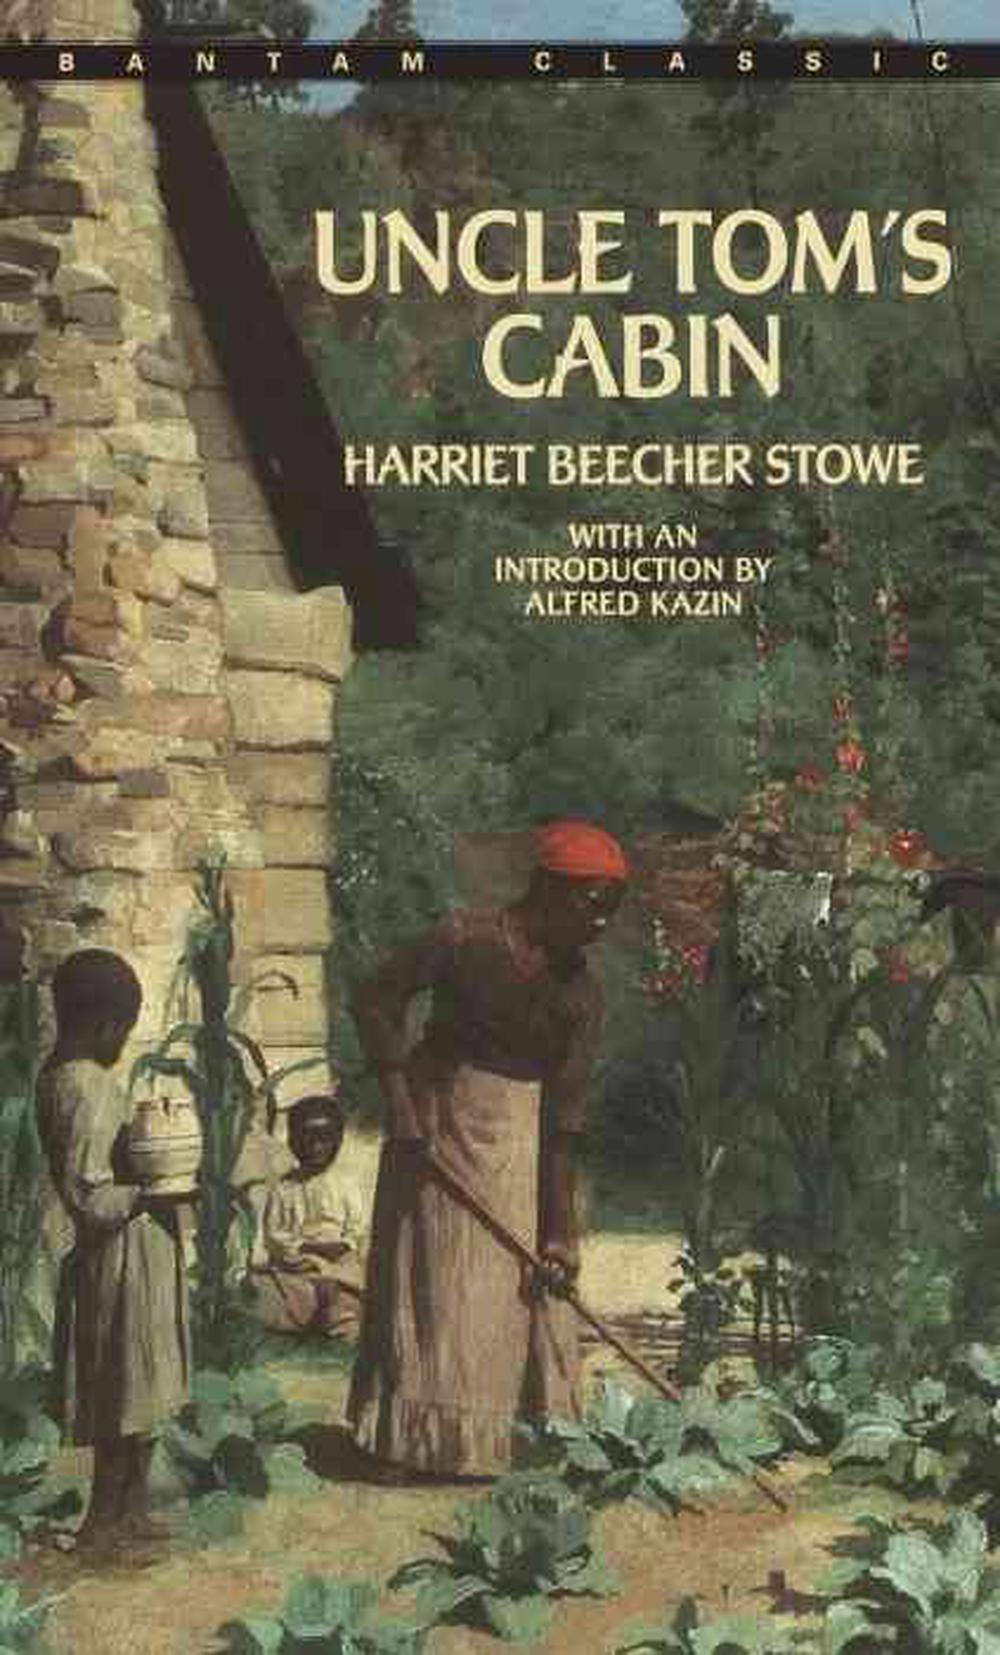 uncle tom's cabin book review essay